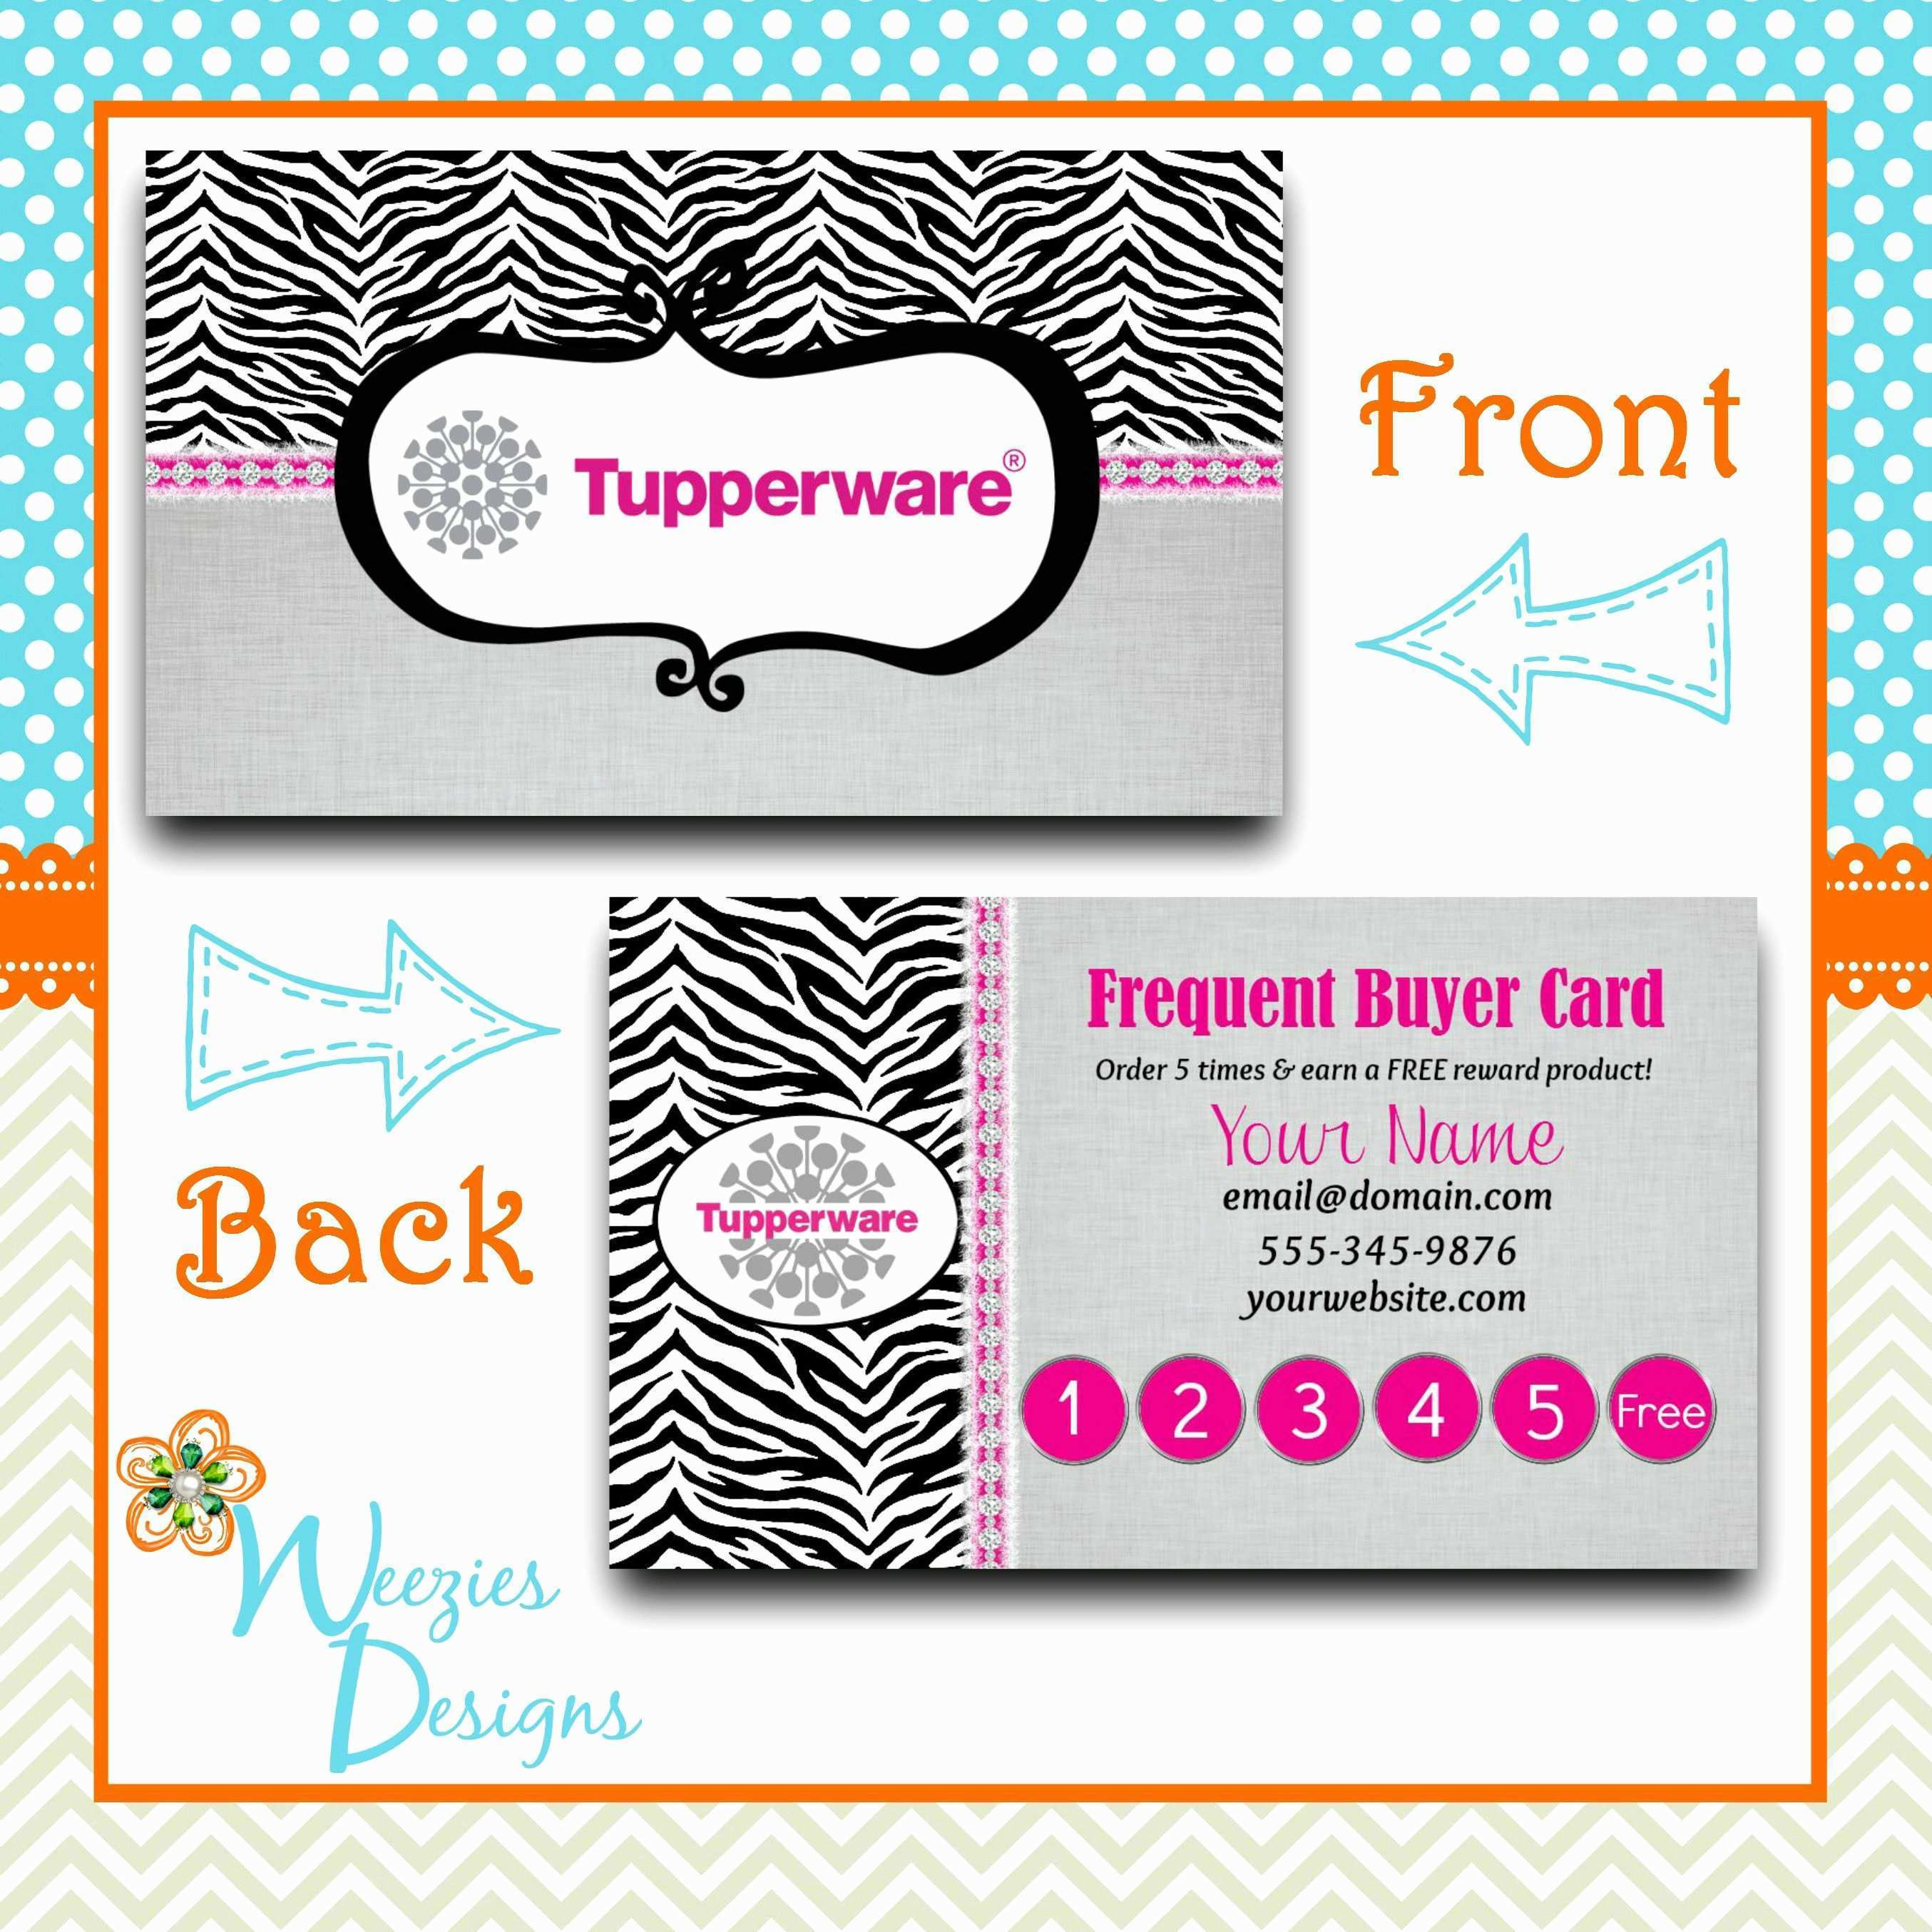 Business Card Template Avery 8371 Free Punch Professional Of Avery Business Cards Templates